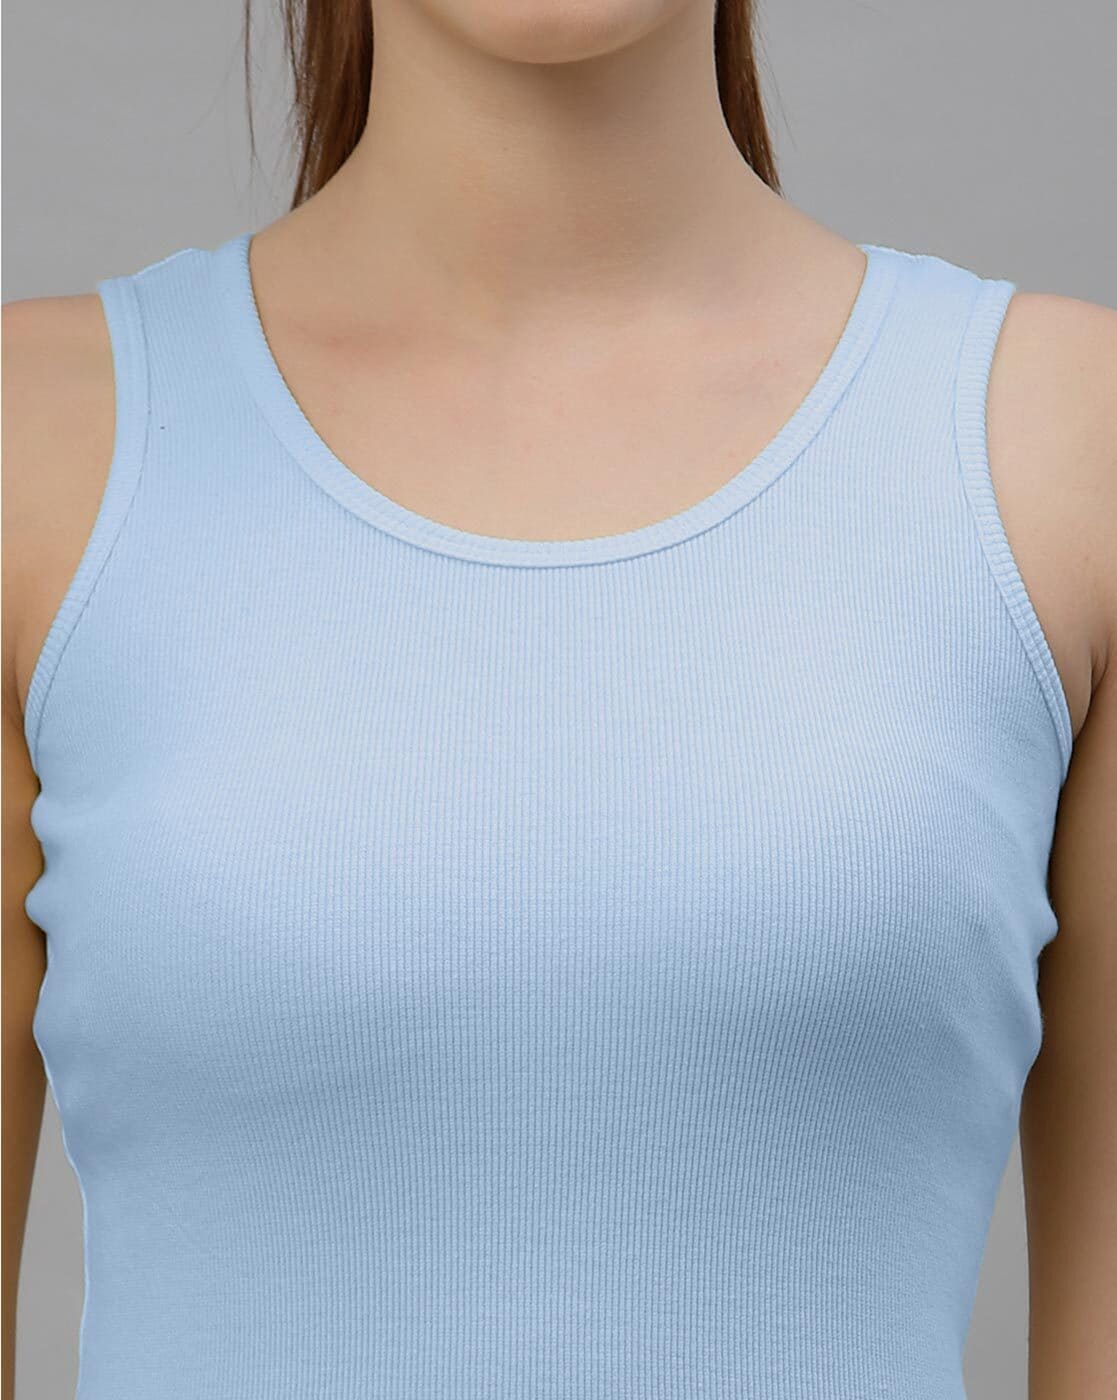 Buy online Women's Tank Top Round Neck Top from western wear for Women by  Fbar for ₹339 at 52% off